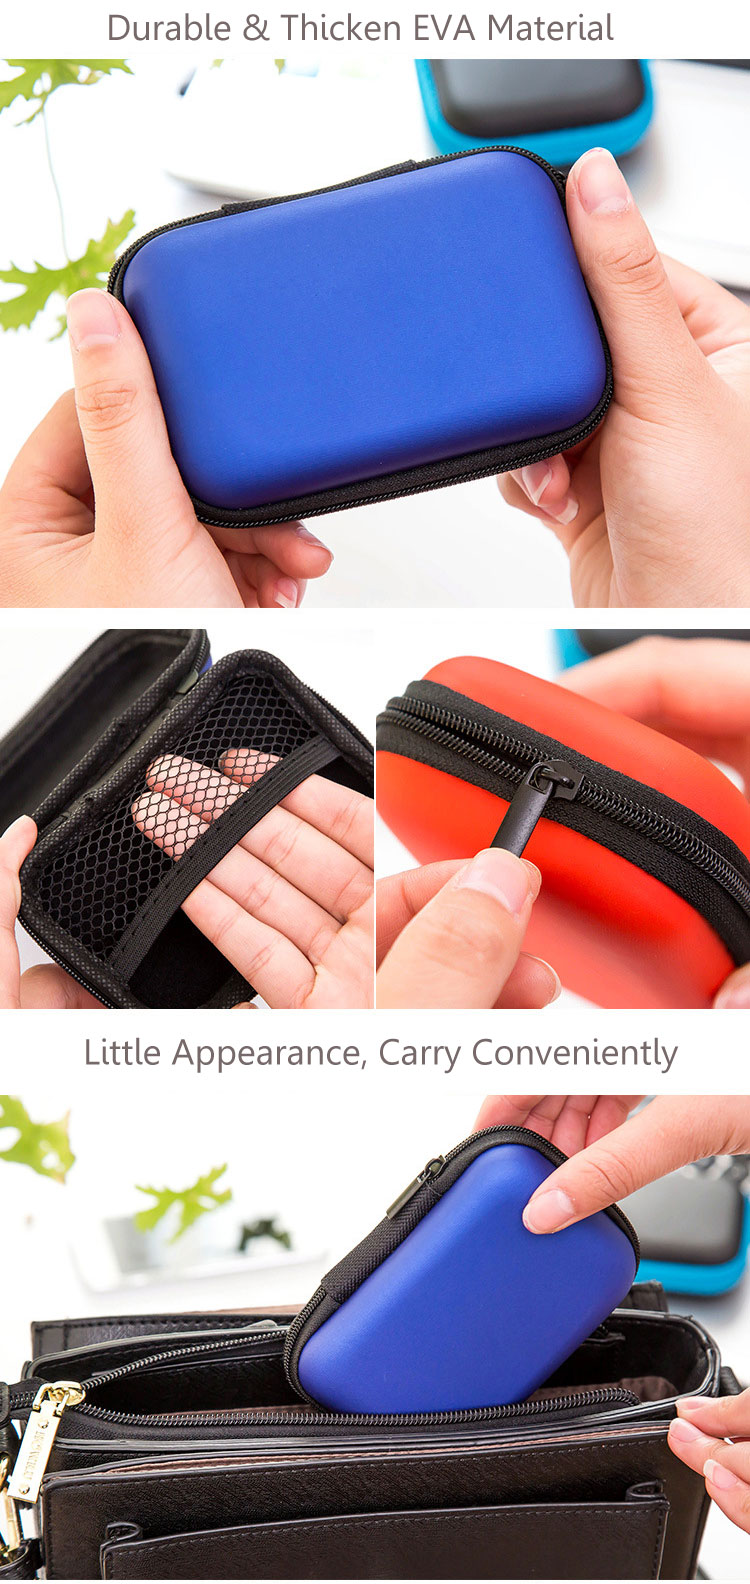 Headphone-Cable-Cell-Phone-Charger-Data-Cable-Box-Headset-Storage-Bag-Organizer-1118879